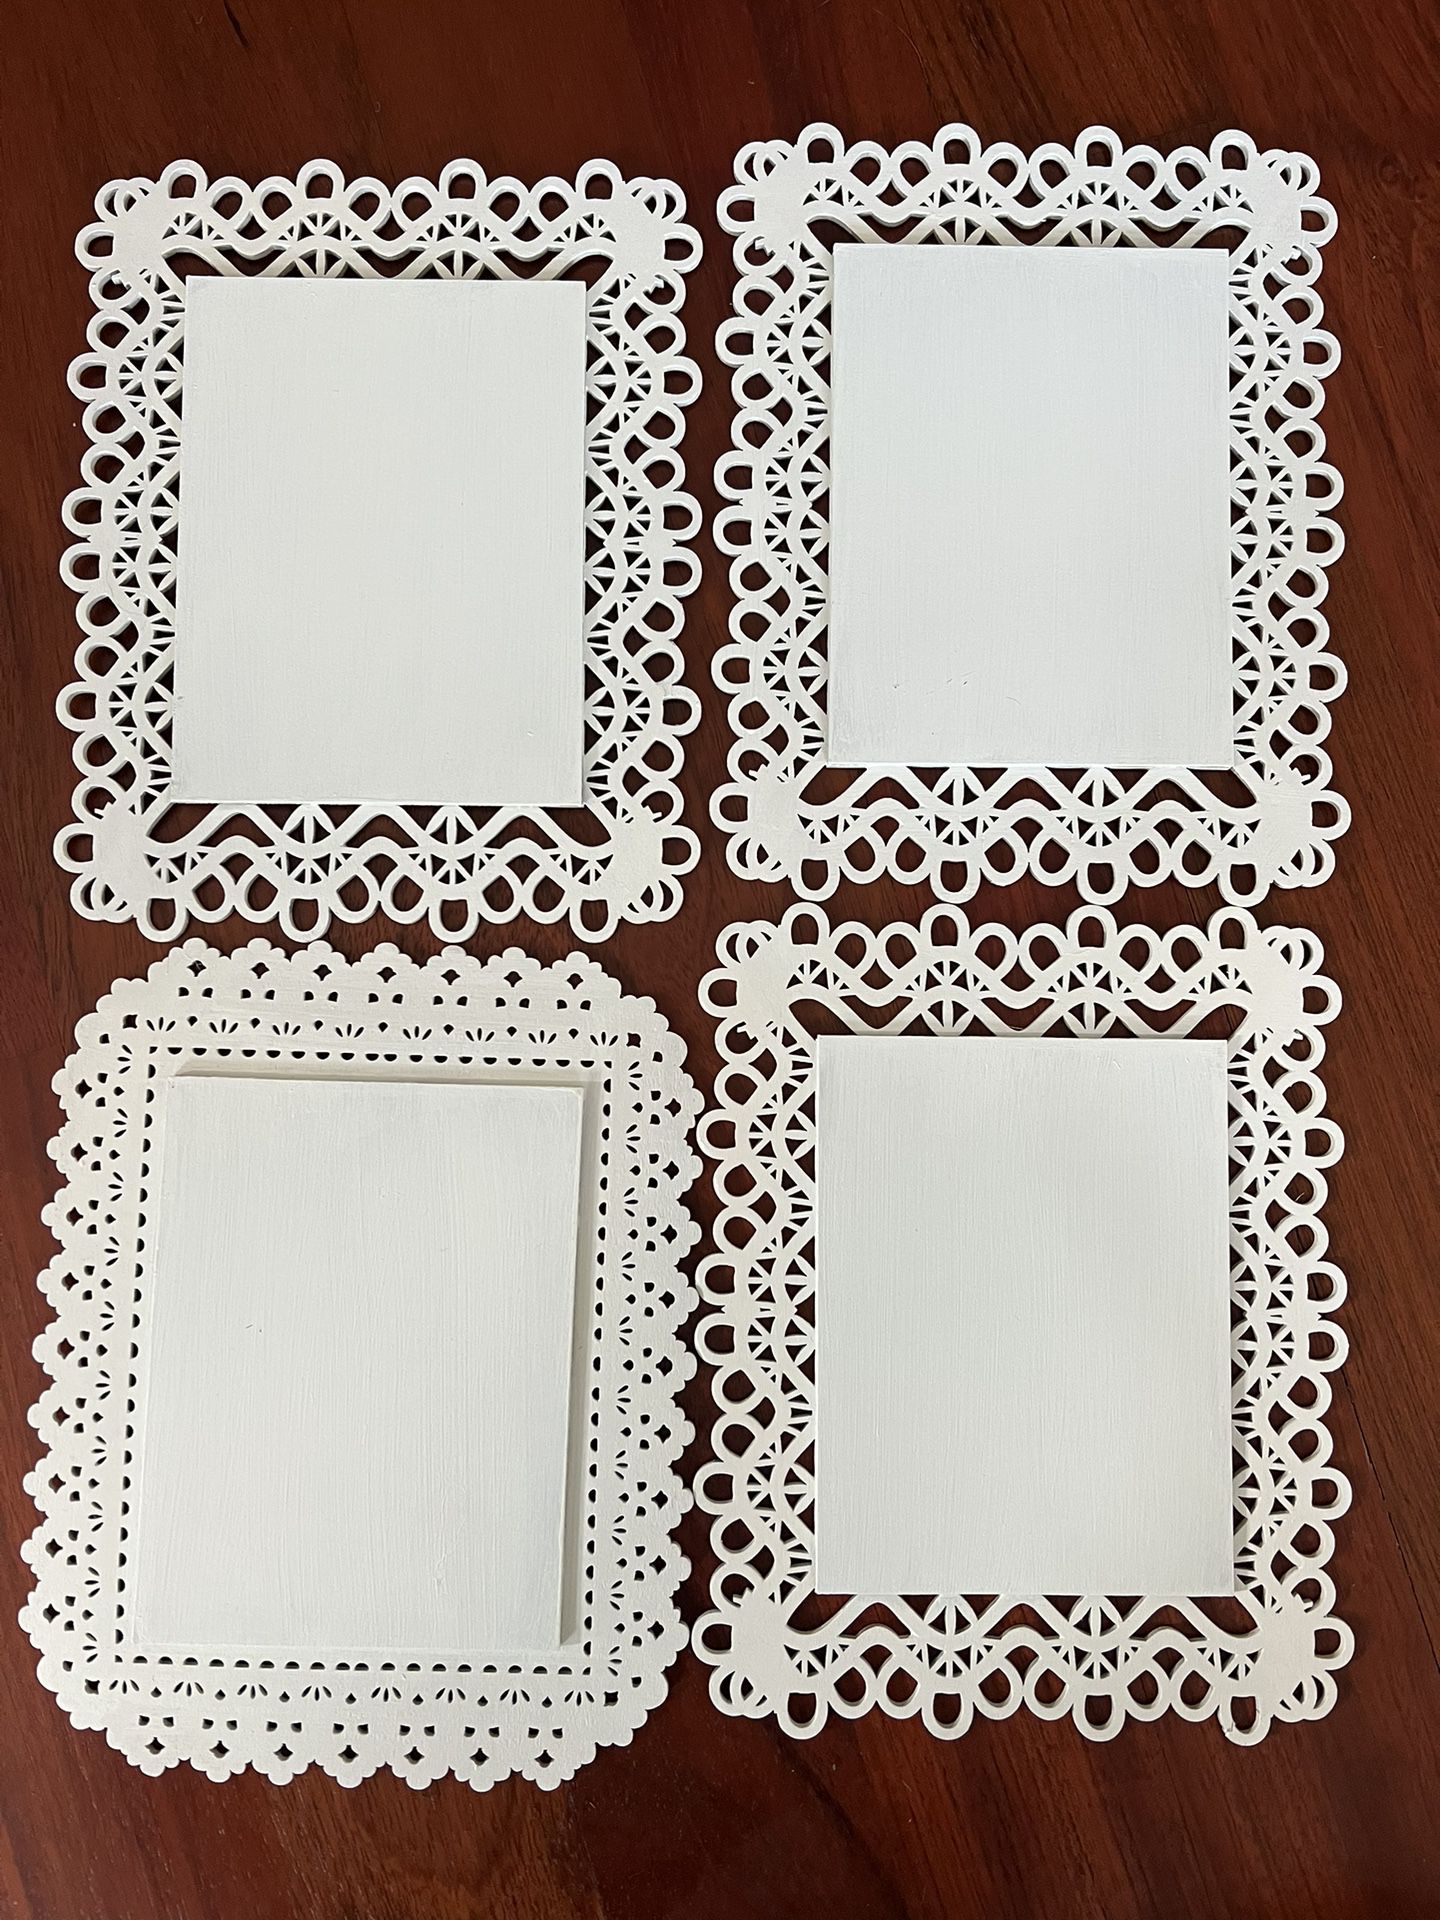 4 Blank Signs For Wedding Or Home